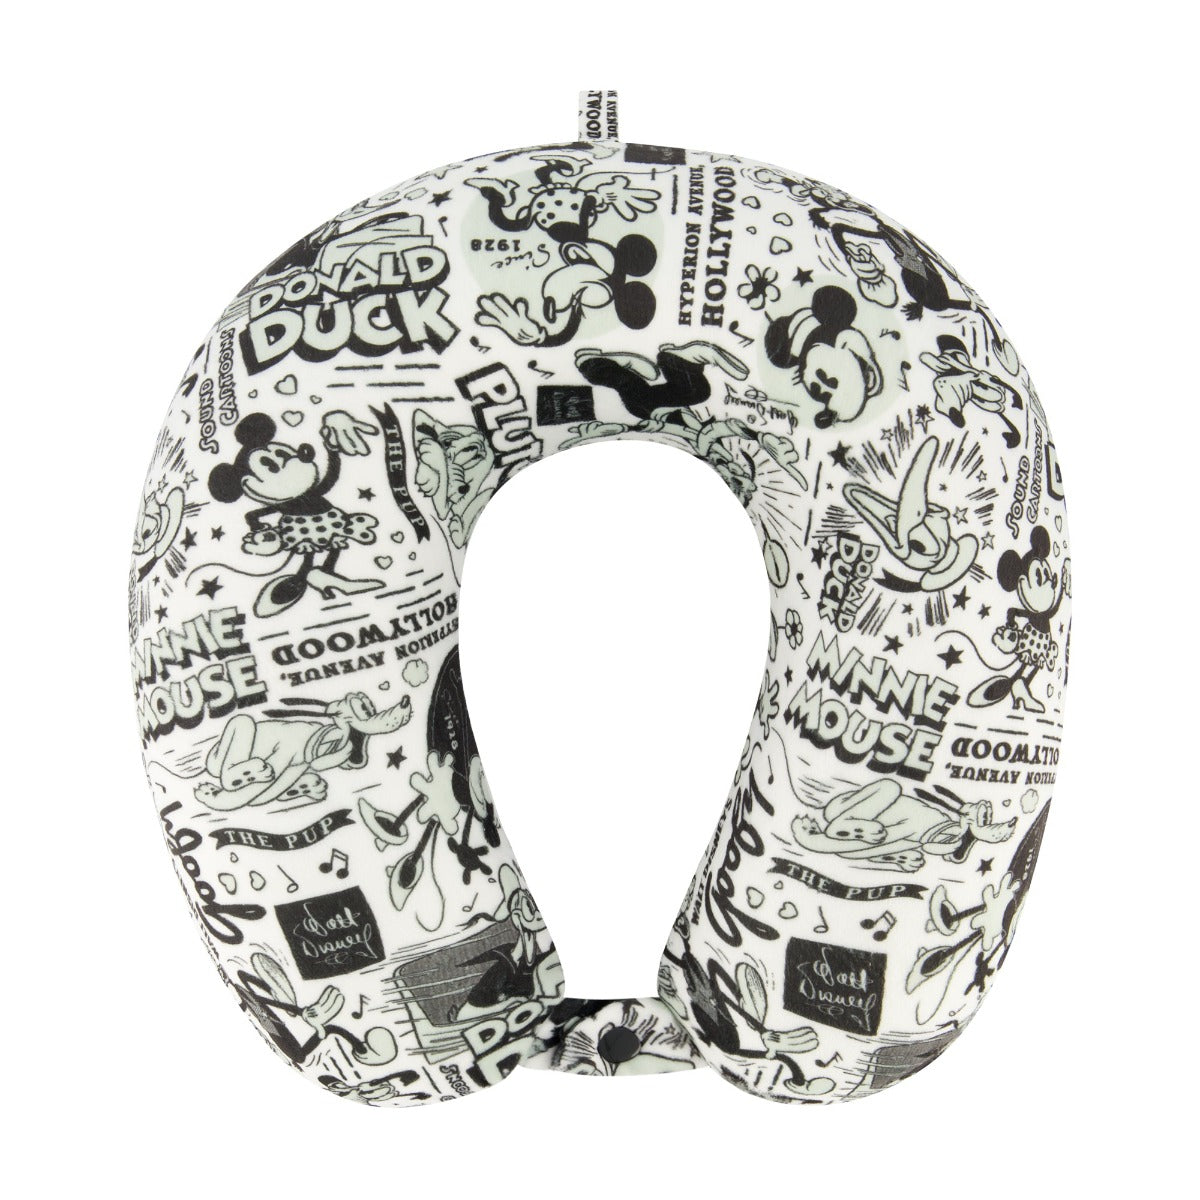 Ful Disney 100 year anniversary characters all over neck pillow - best travel pillows for traveling